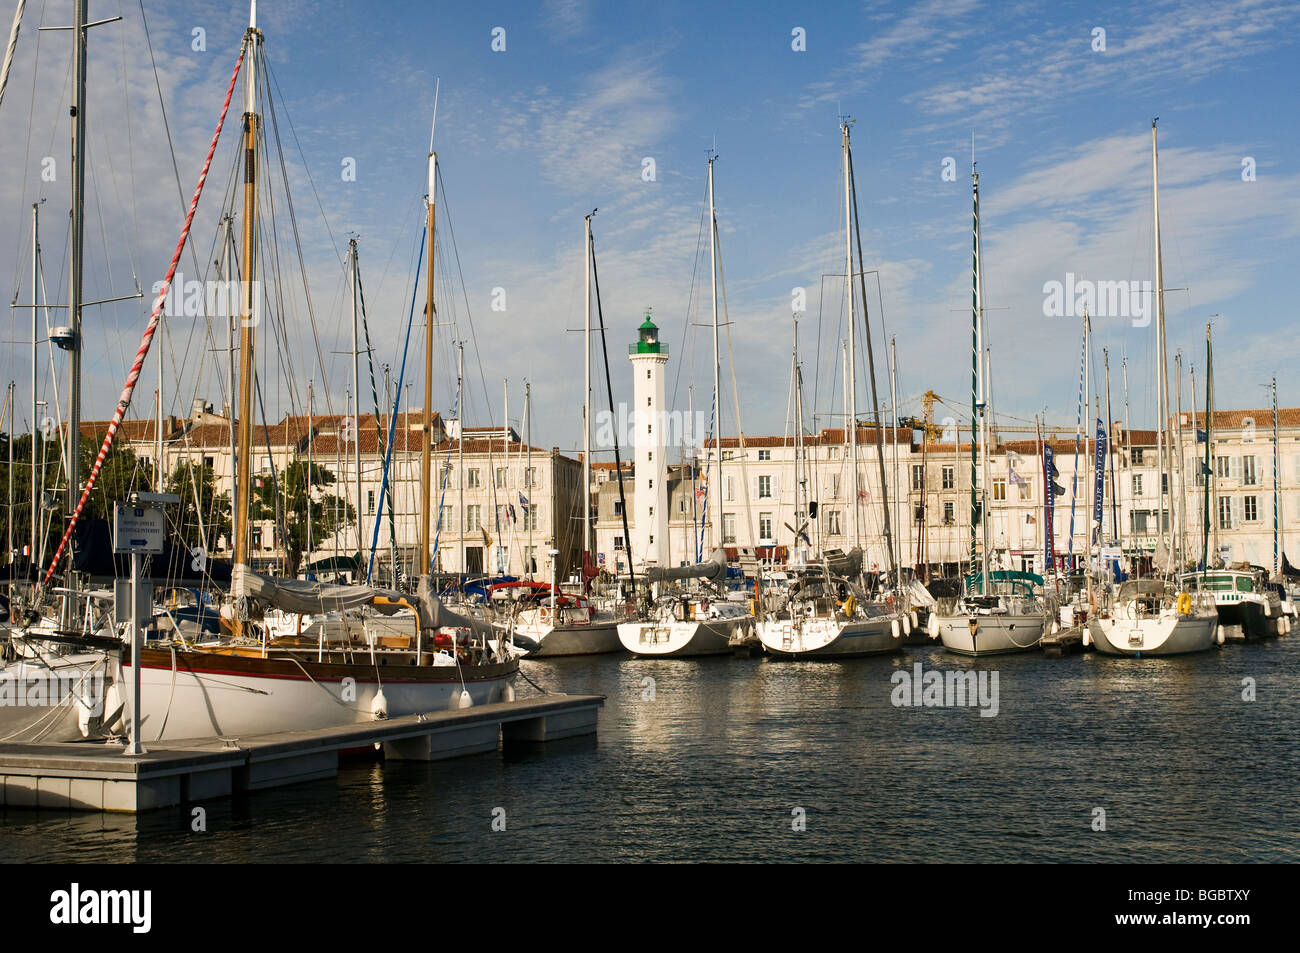 The Old Port, the oldest port of La Rochelle and the historic heart of ...